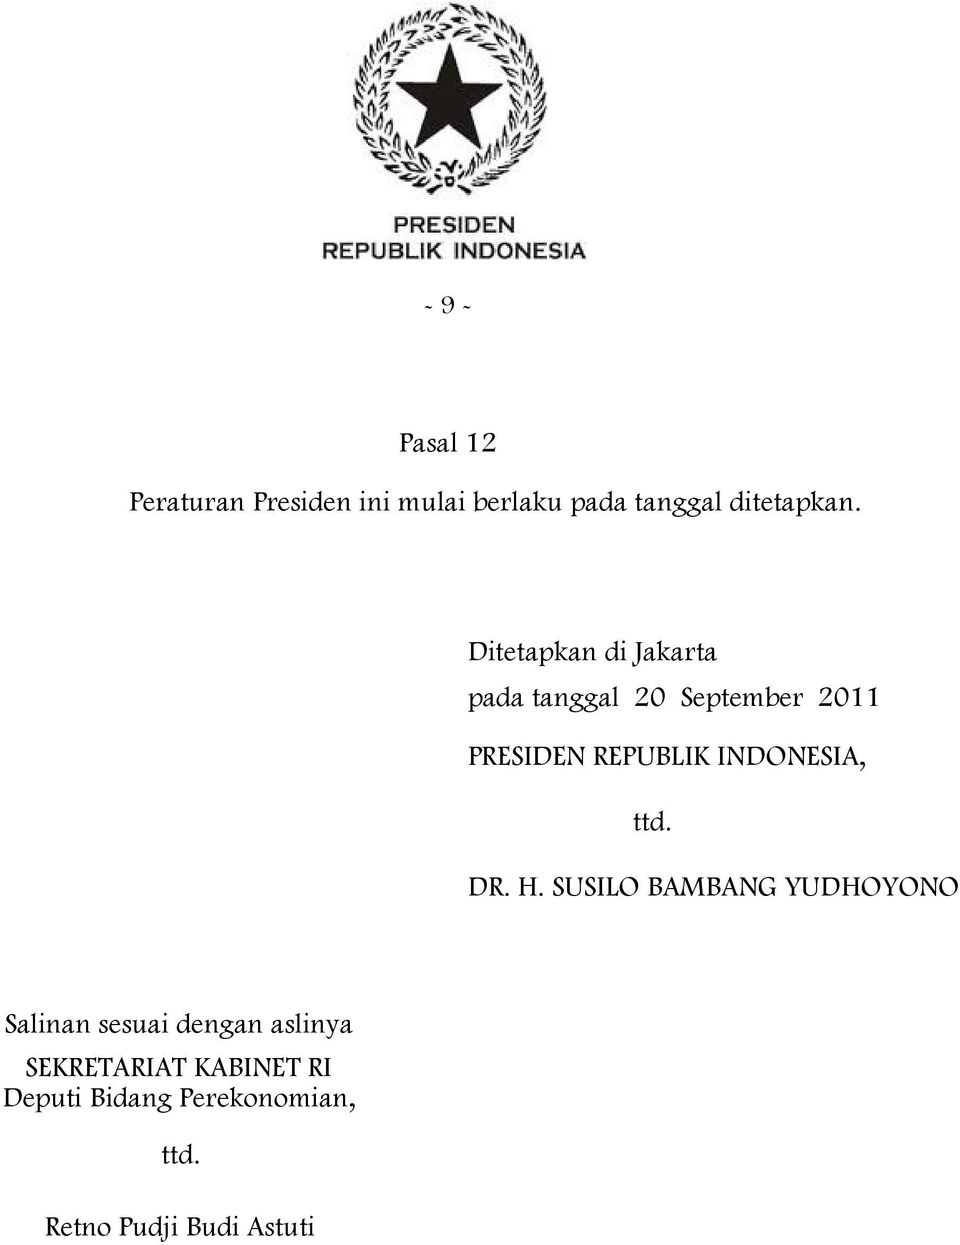 INDONESIA, ttd. DR. H.